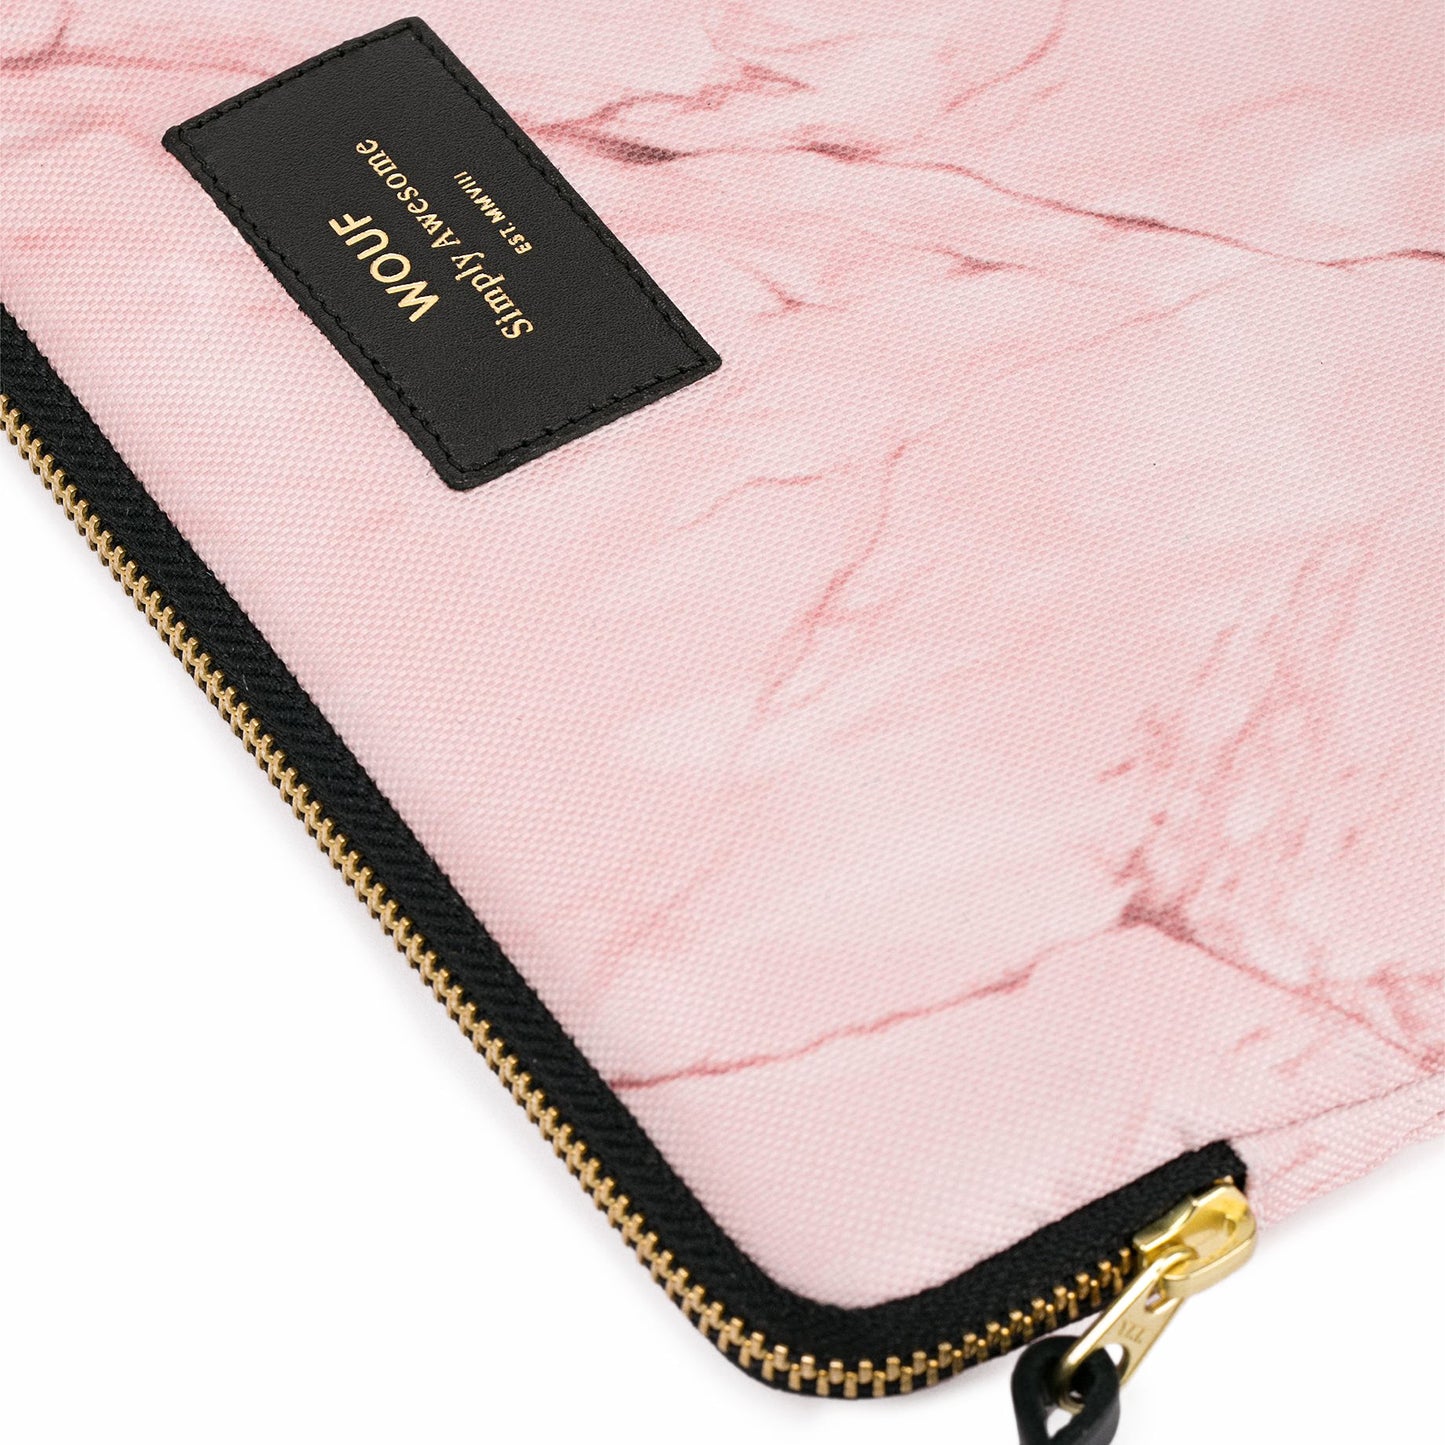 IPAD CASE, PALE PINK MARBLE